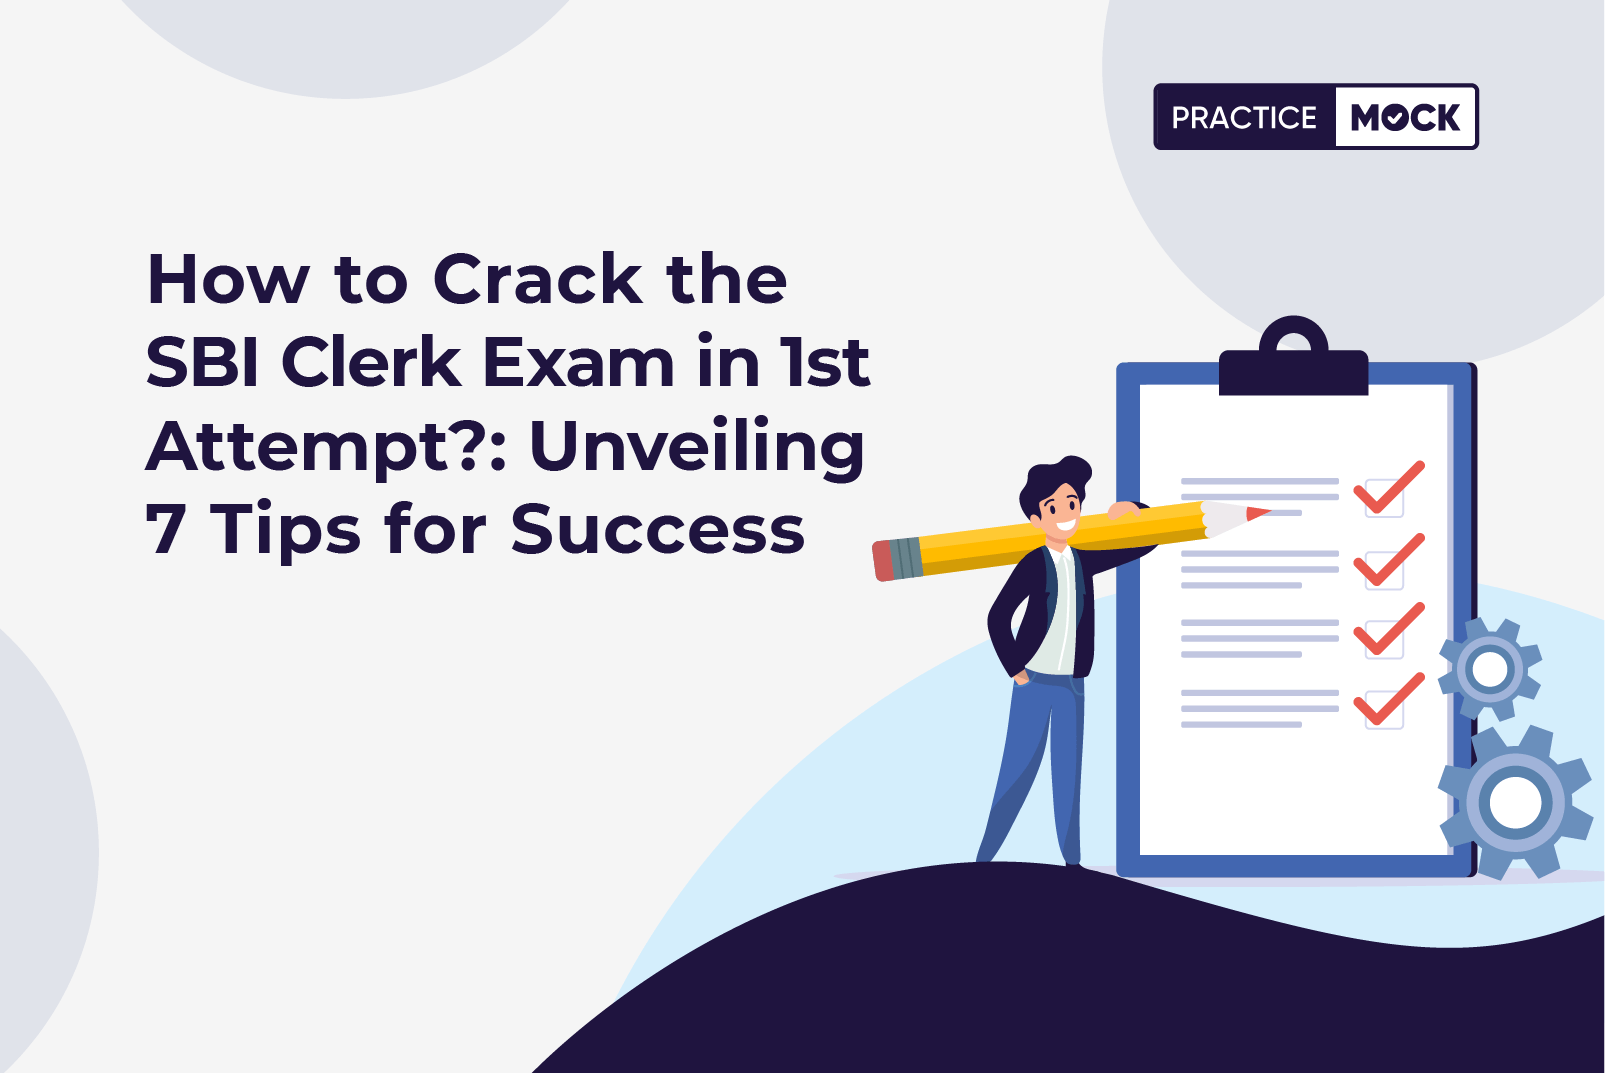 How to Crack the SBI Clerk Exam in 1st Attempt Unveiling 7 Tips for Success